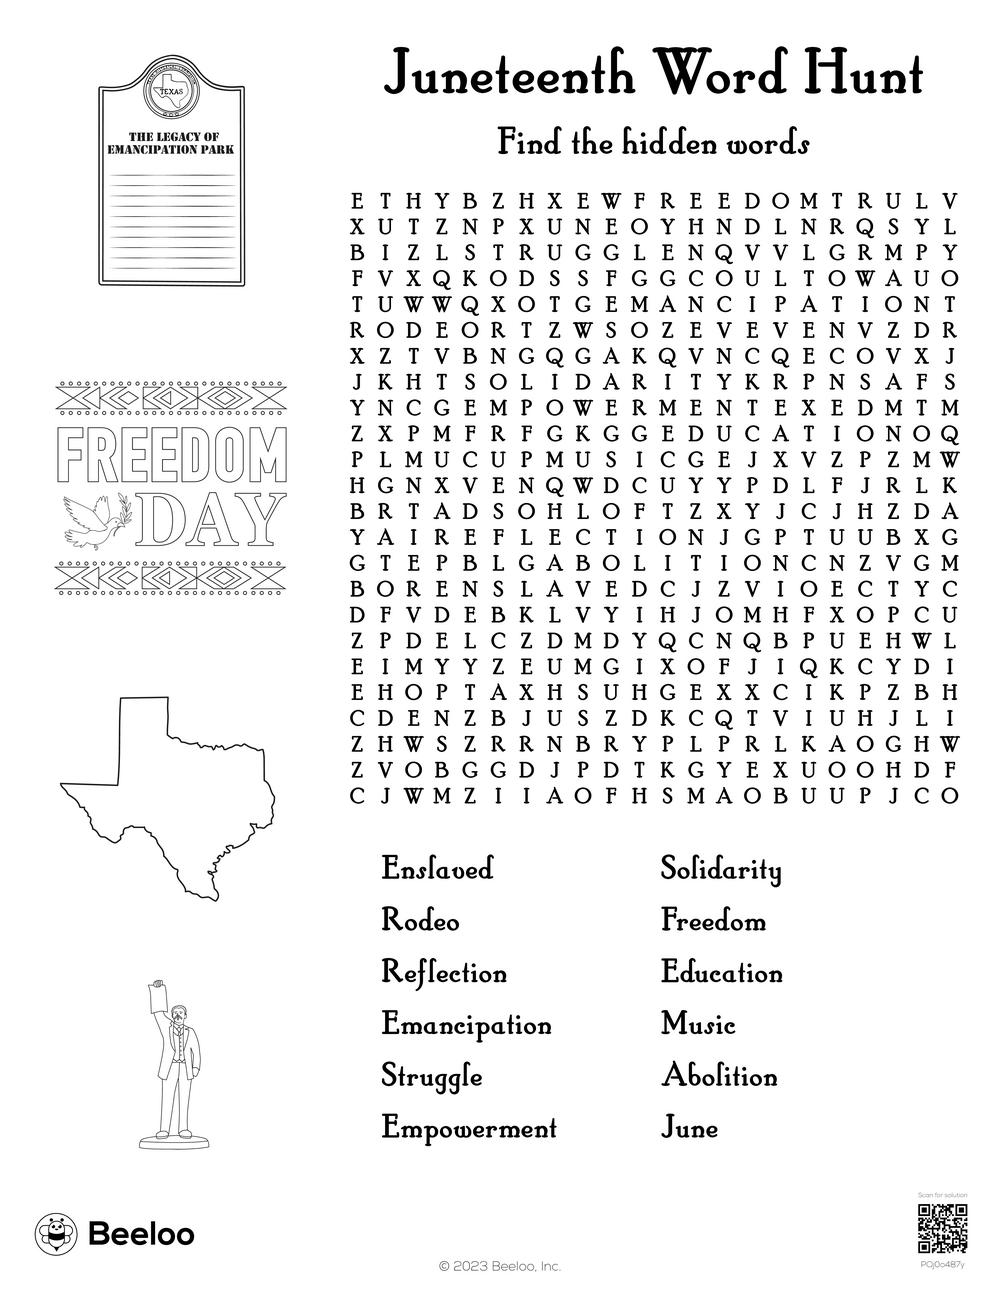 Juneteenth Word Search Printable